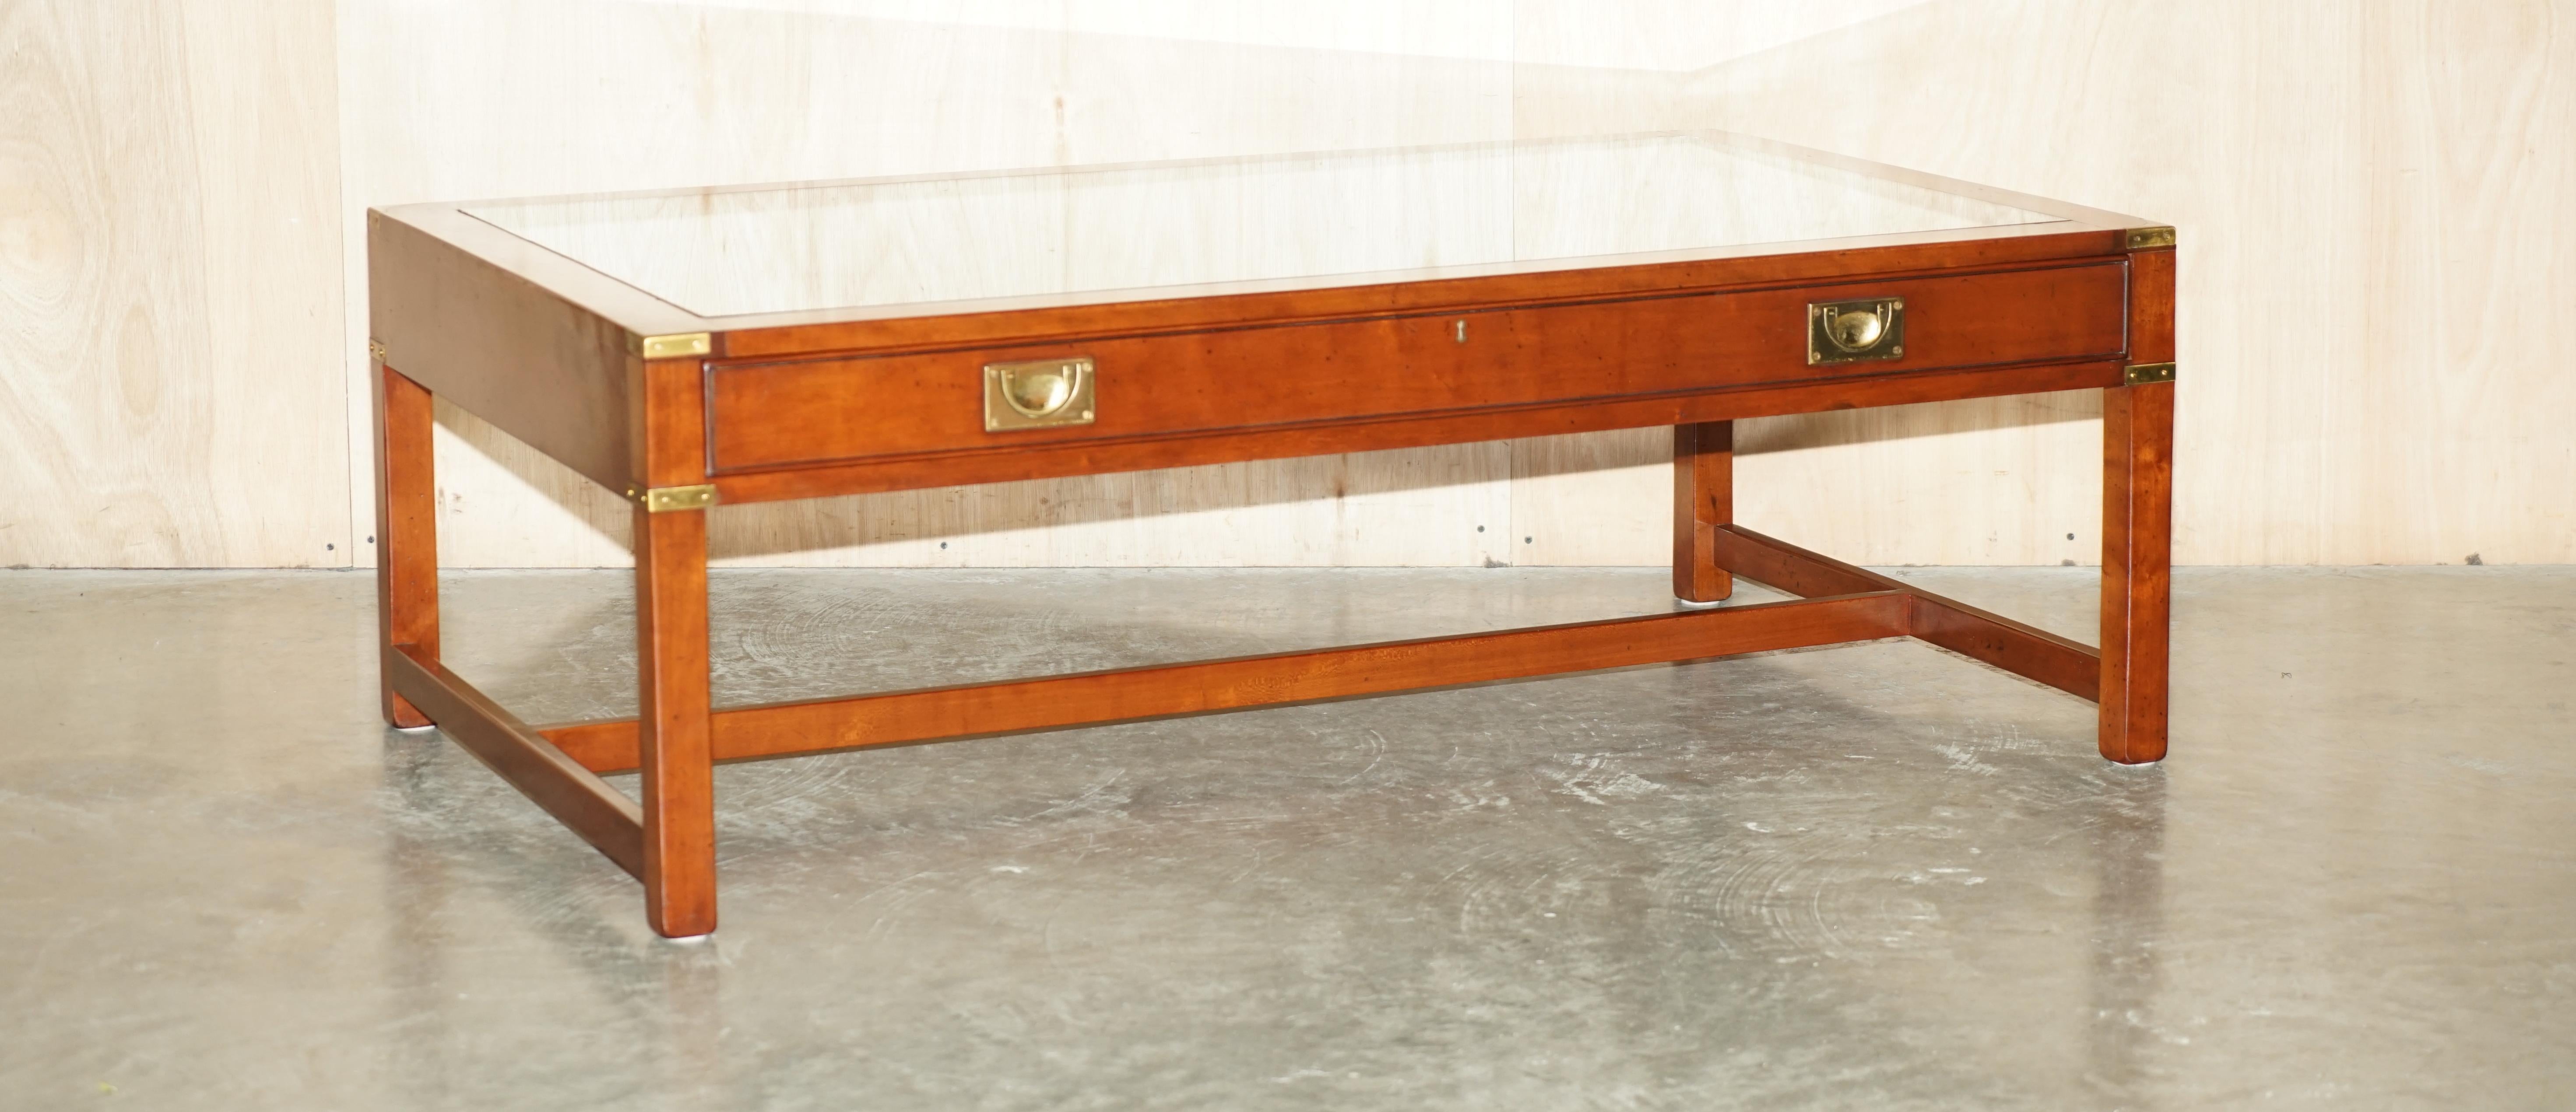 We are delighted to offer for sale this lovely unique Kennedy showcase display military campaign coffee table.

This table is very much on trend and will never be far from it, the lines are elegant and timeless and it looks sophisticated and